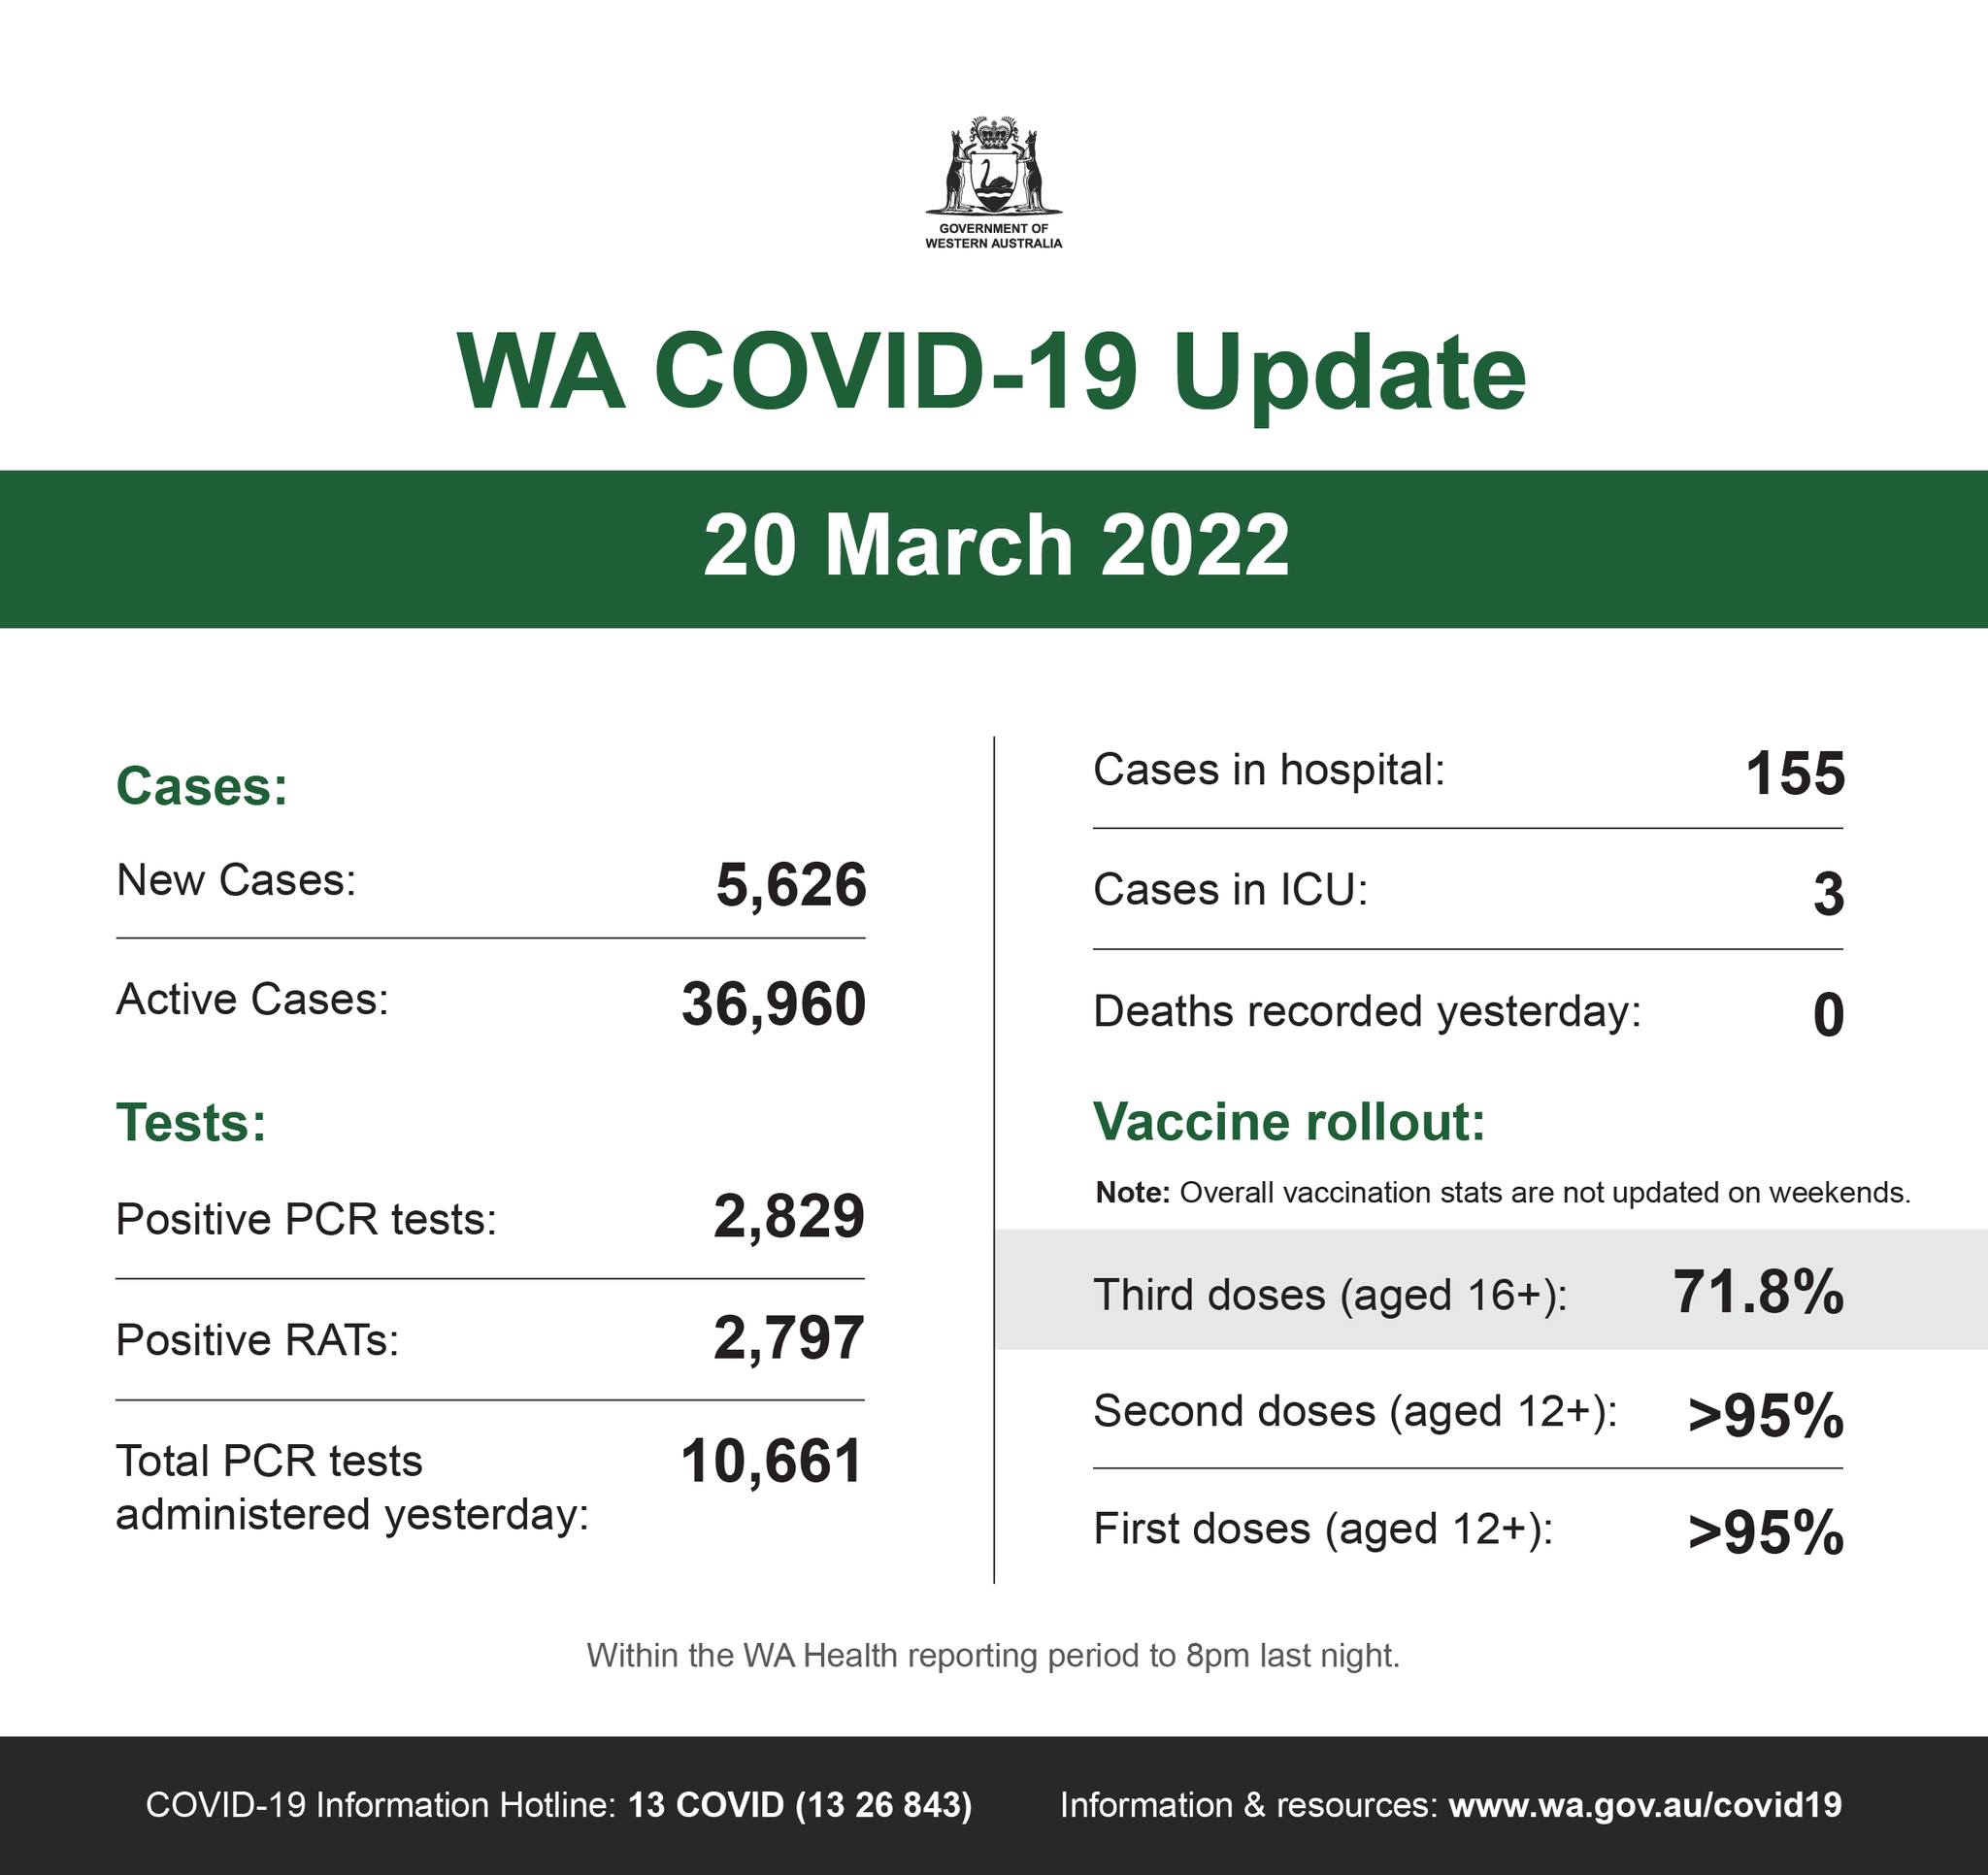 May be an image of text that says 'WESTERNAUSTRALIA WA COVID-19 Update 20 March 2022 Cases: New Cases: Cases in hospital: Active Cases: 5,626 Cases in ICU: 155 Tests: 36,960 3 Positive PCR tests: Deaths recorded yesterday: Vaccine rollout: 2,829 Positive RATs: Note: Overall vaccinatior stats are not updated on weekends. 2,797 Total PCR tests administered yesterday: Third doses (aged 16+): 10,661 71.8% Second doses (aged 12+): >95% First doses (aged 12+): Within the WA Health reporting period 8pm last night. COVID-19 Information H”tline: 13 COVID >95% 26 843) nformation resources www wa. .gov. .au/covid19'